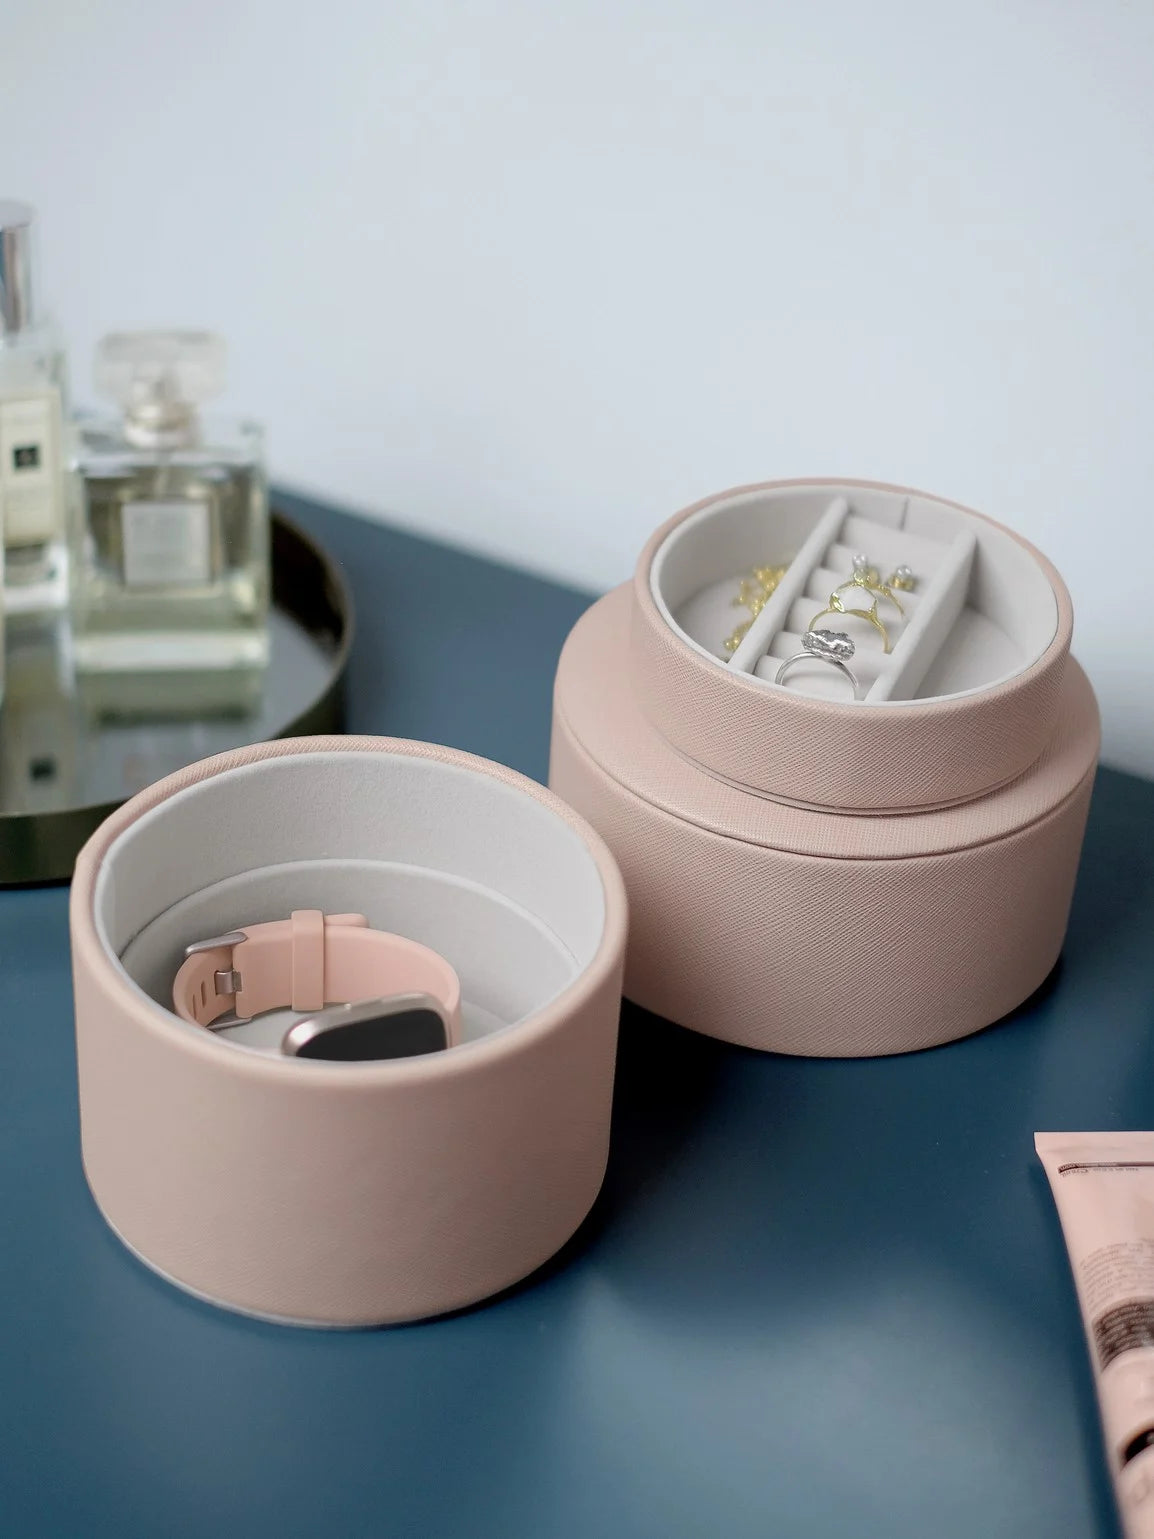 Stackers Blush Pink Bedside Jewellery Pod